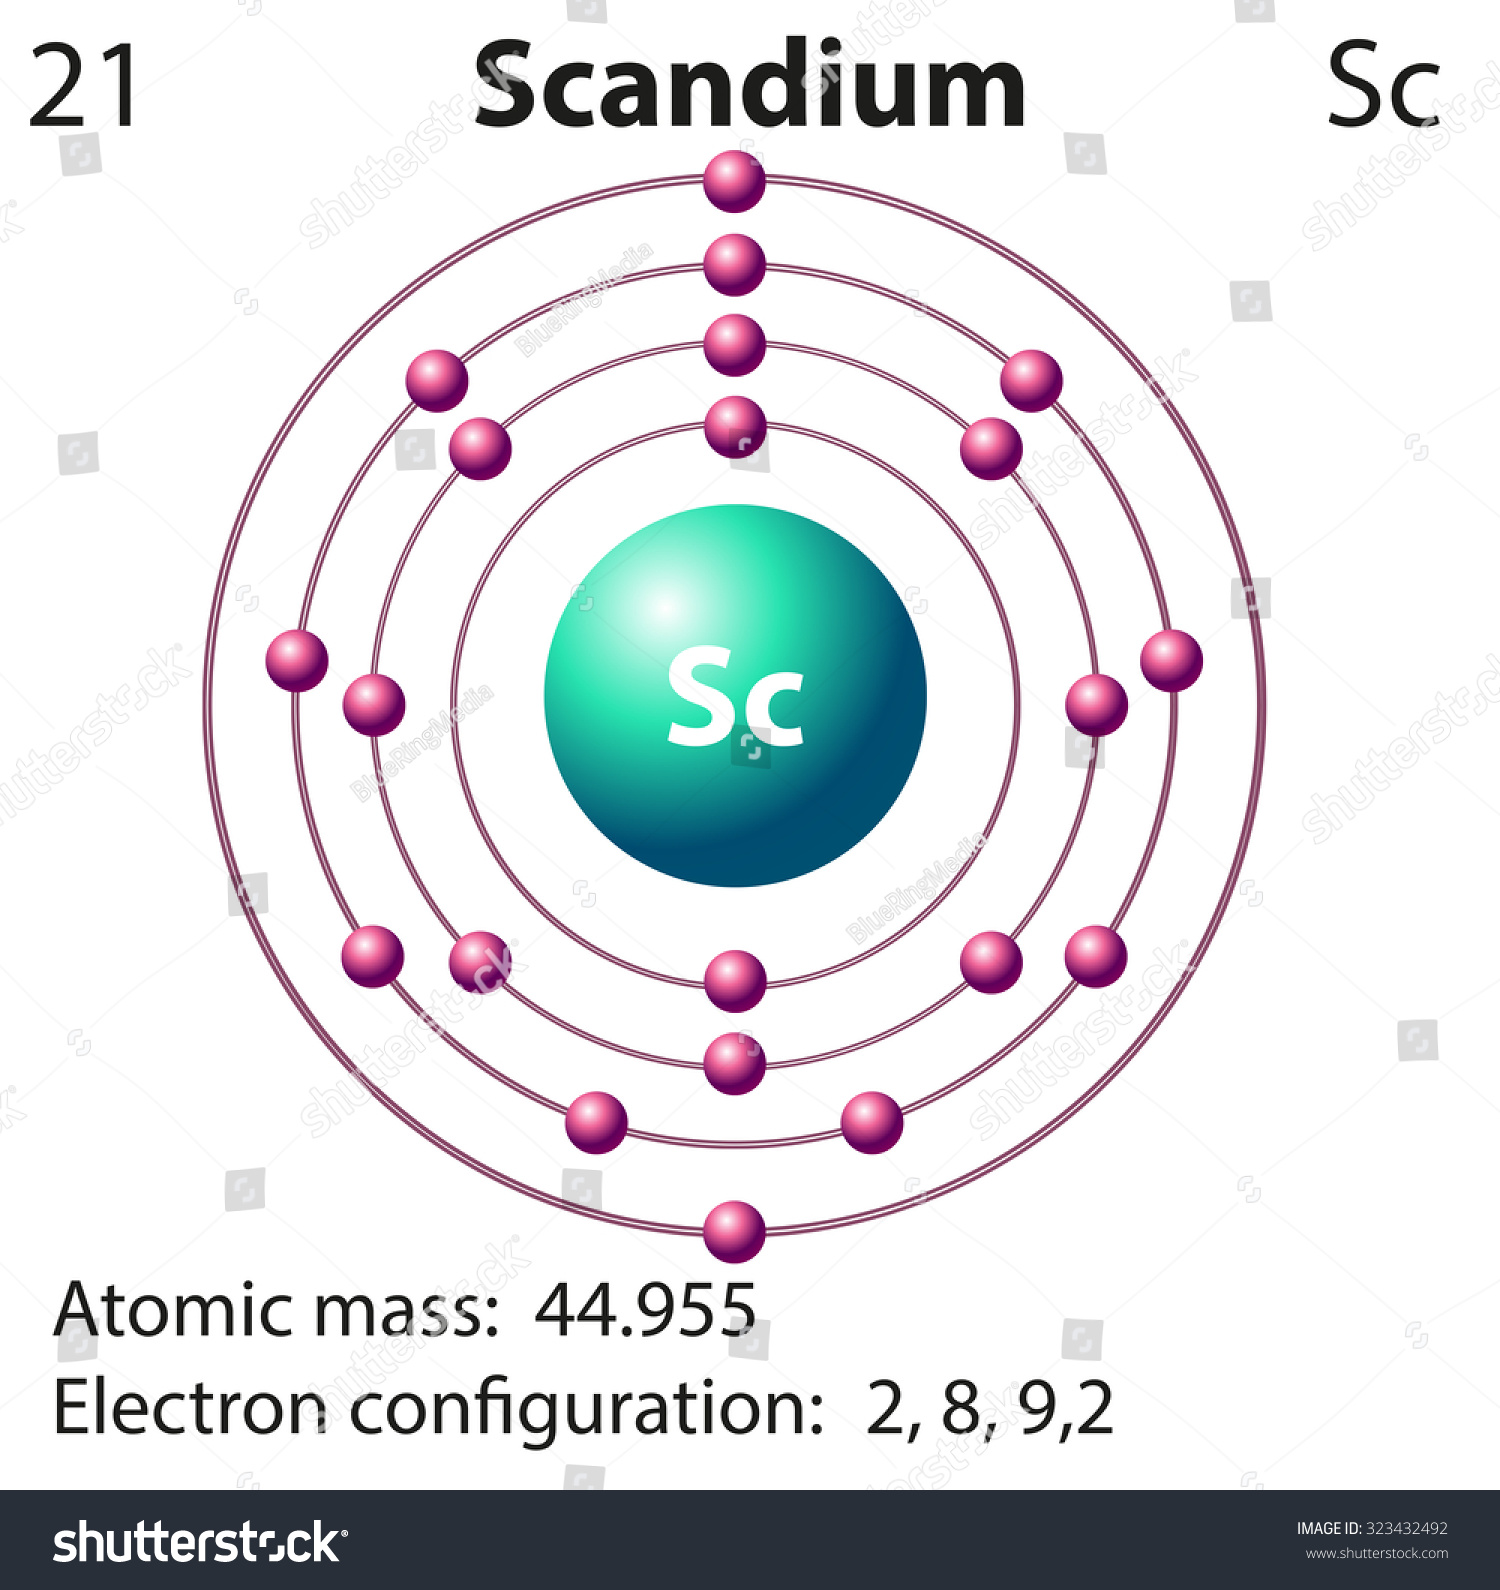 draw the atomic model of scantium - Science - Structure of the Atom